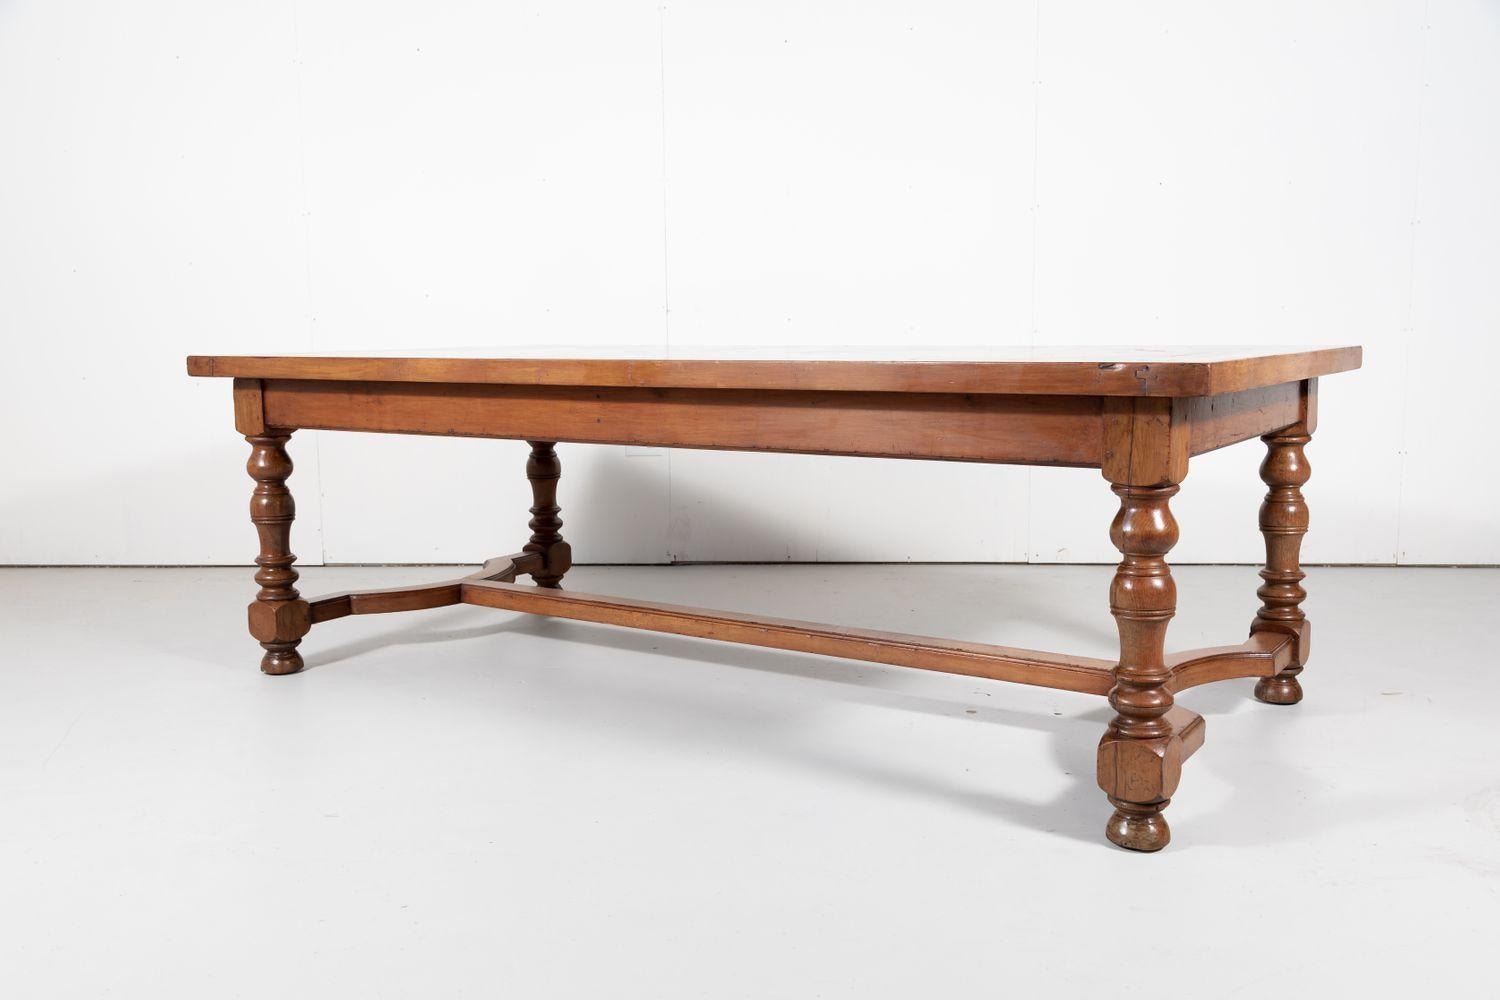 Handsome Louis Philippe style walnut farm table, circa 1890s, from the Normandy region. It has a large rectangular top with parquetry inlay, resting on turned legs joined by a carved and scalloped 